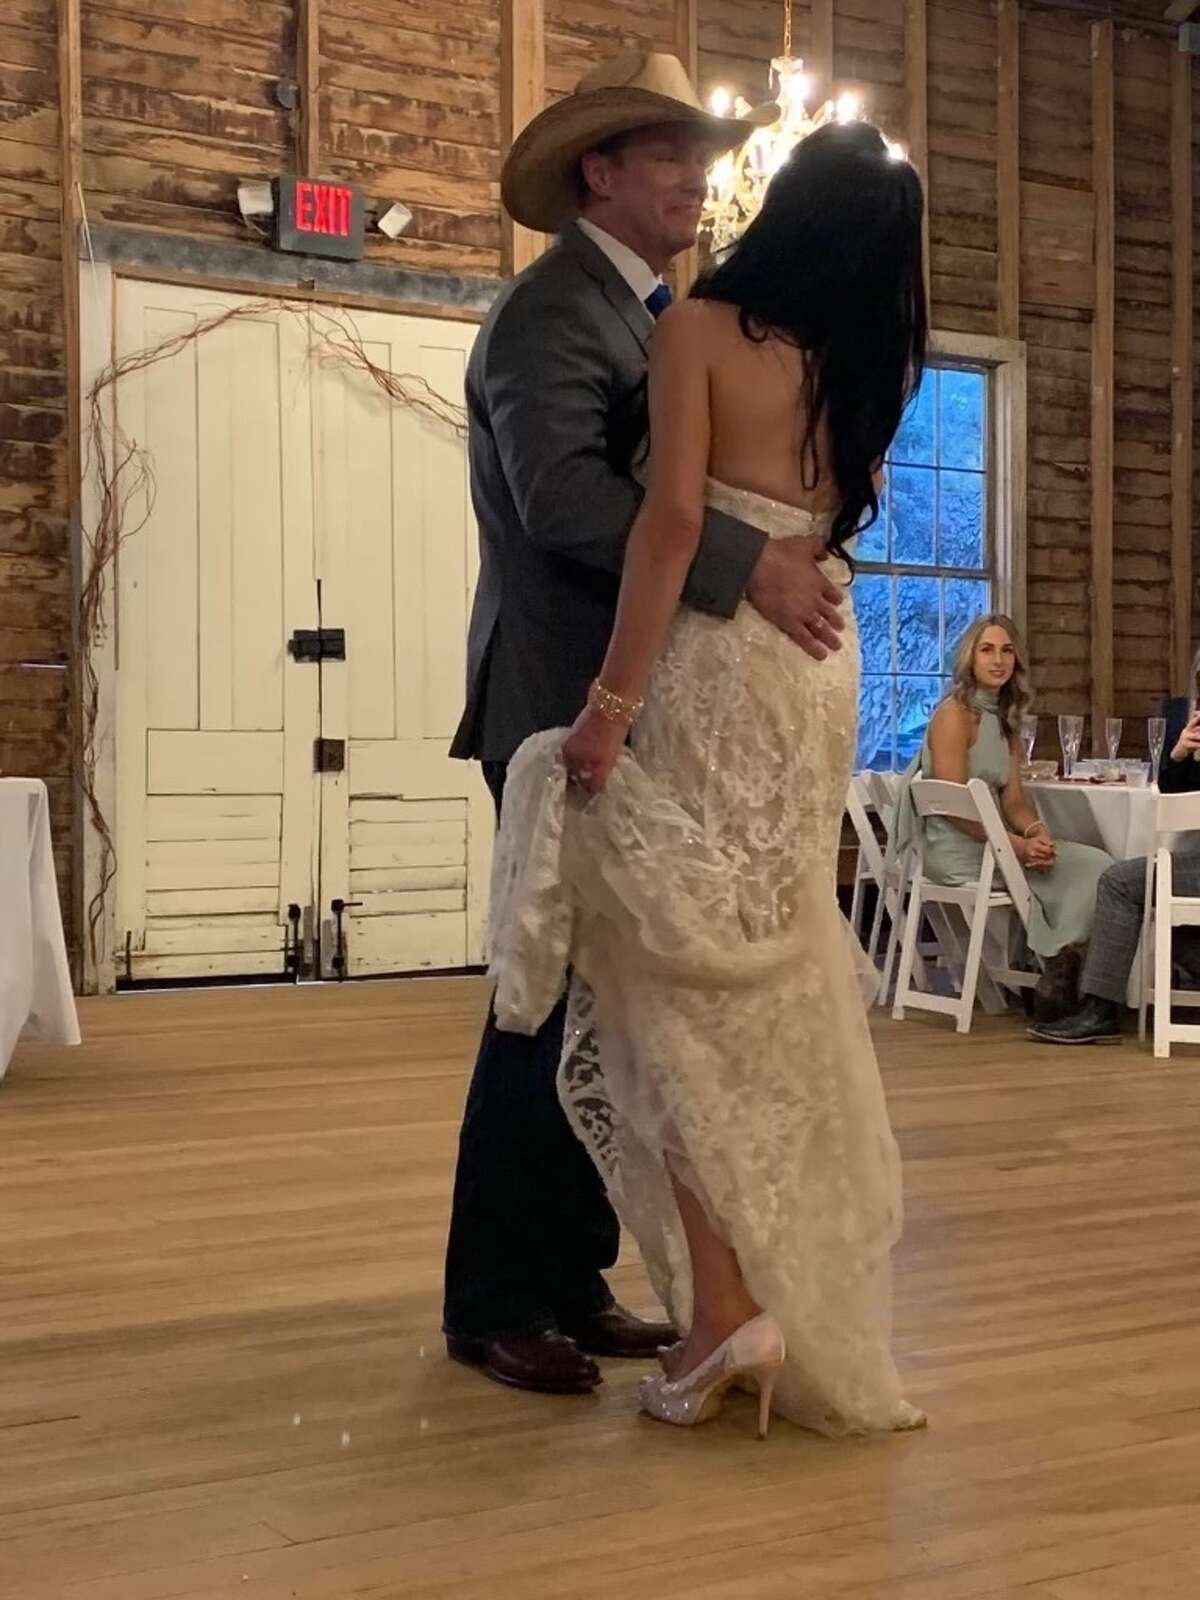 News 4 Chief Meteorologist Chris Suchan marries his wife Amber in an intimate Hill Country wedding.